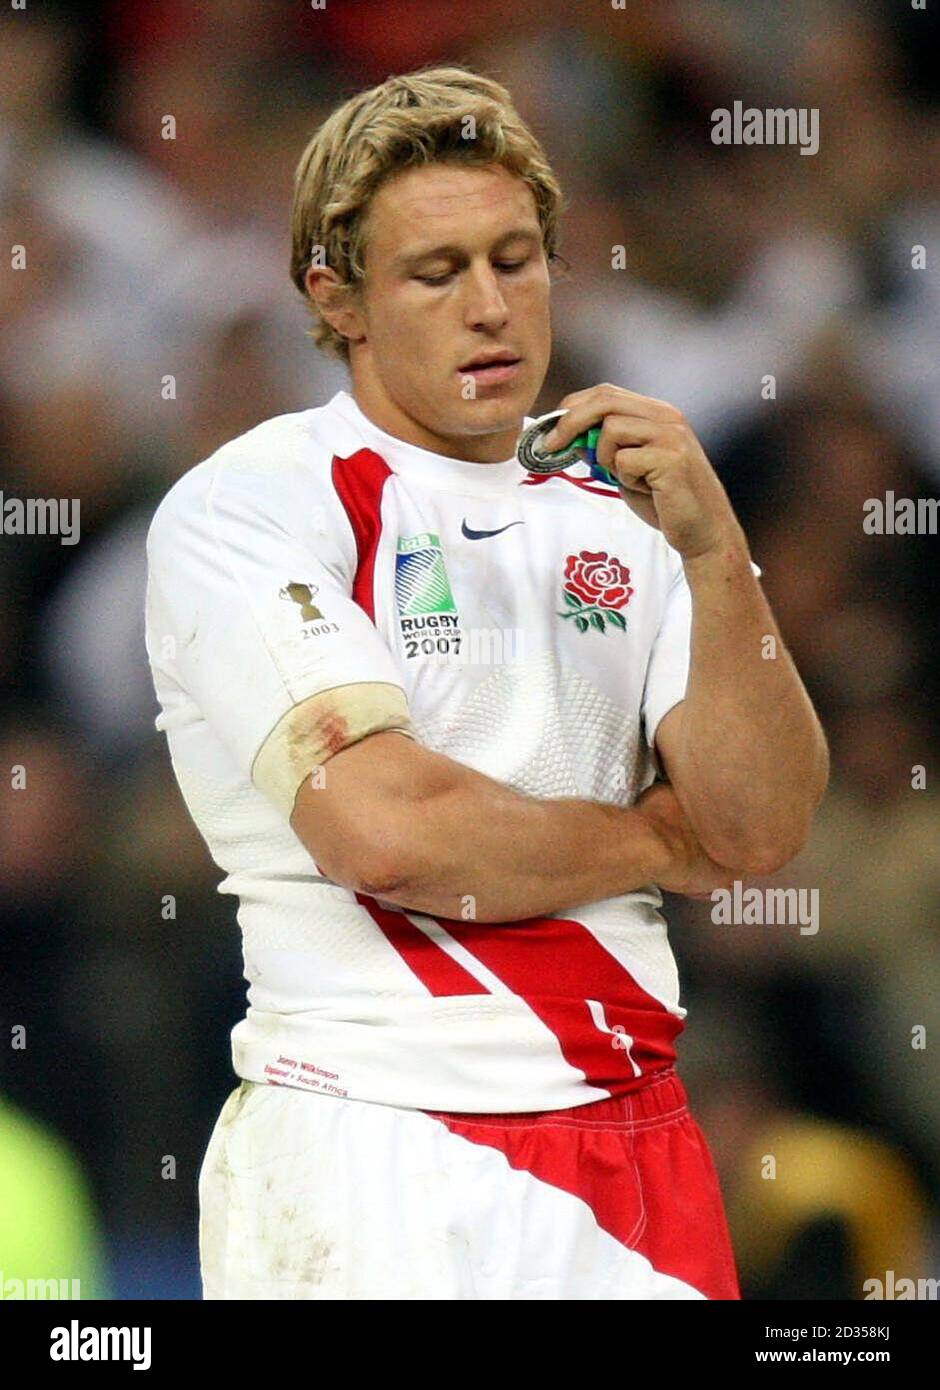 England's Jonny Wilkinson looks at his losers medal after the IRB Rugby World Cup Final match at Stade de France, Saint Denis, France. Stock Photo